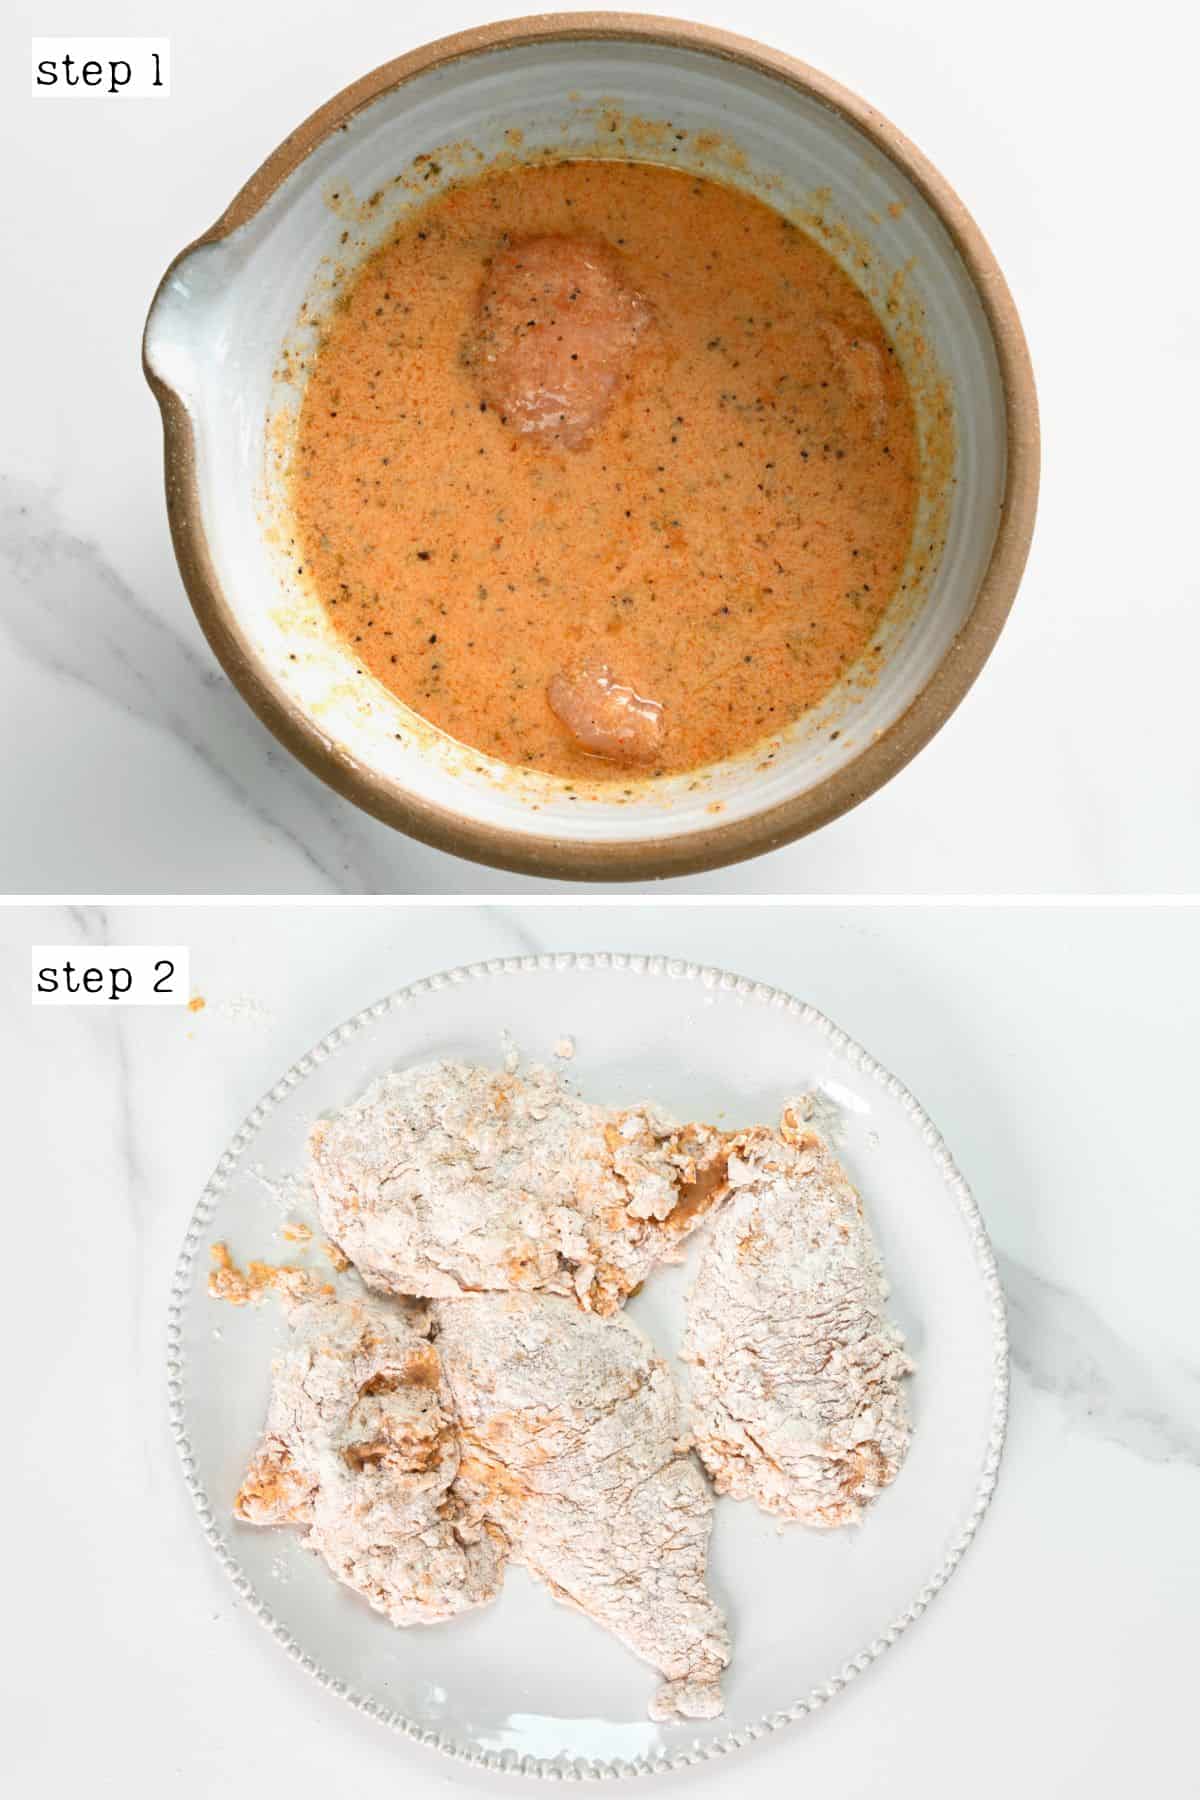 Steps for marinating and breading chicken